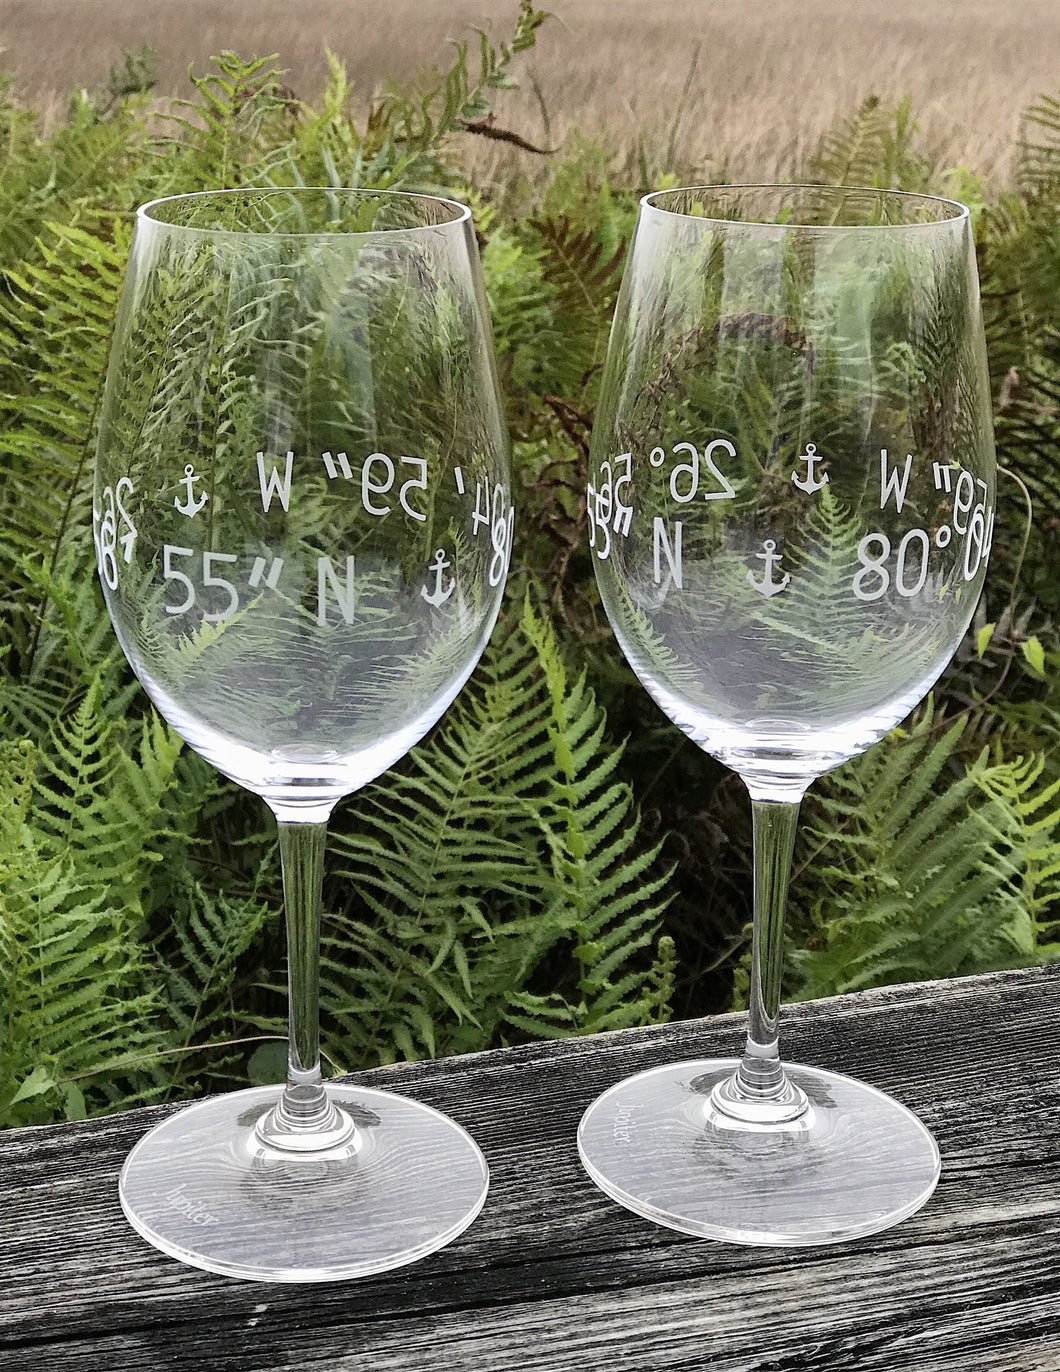 Personalized Riedel Crystal Glasses- great Wedding gift